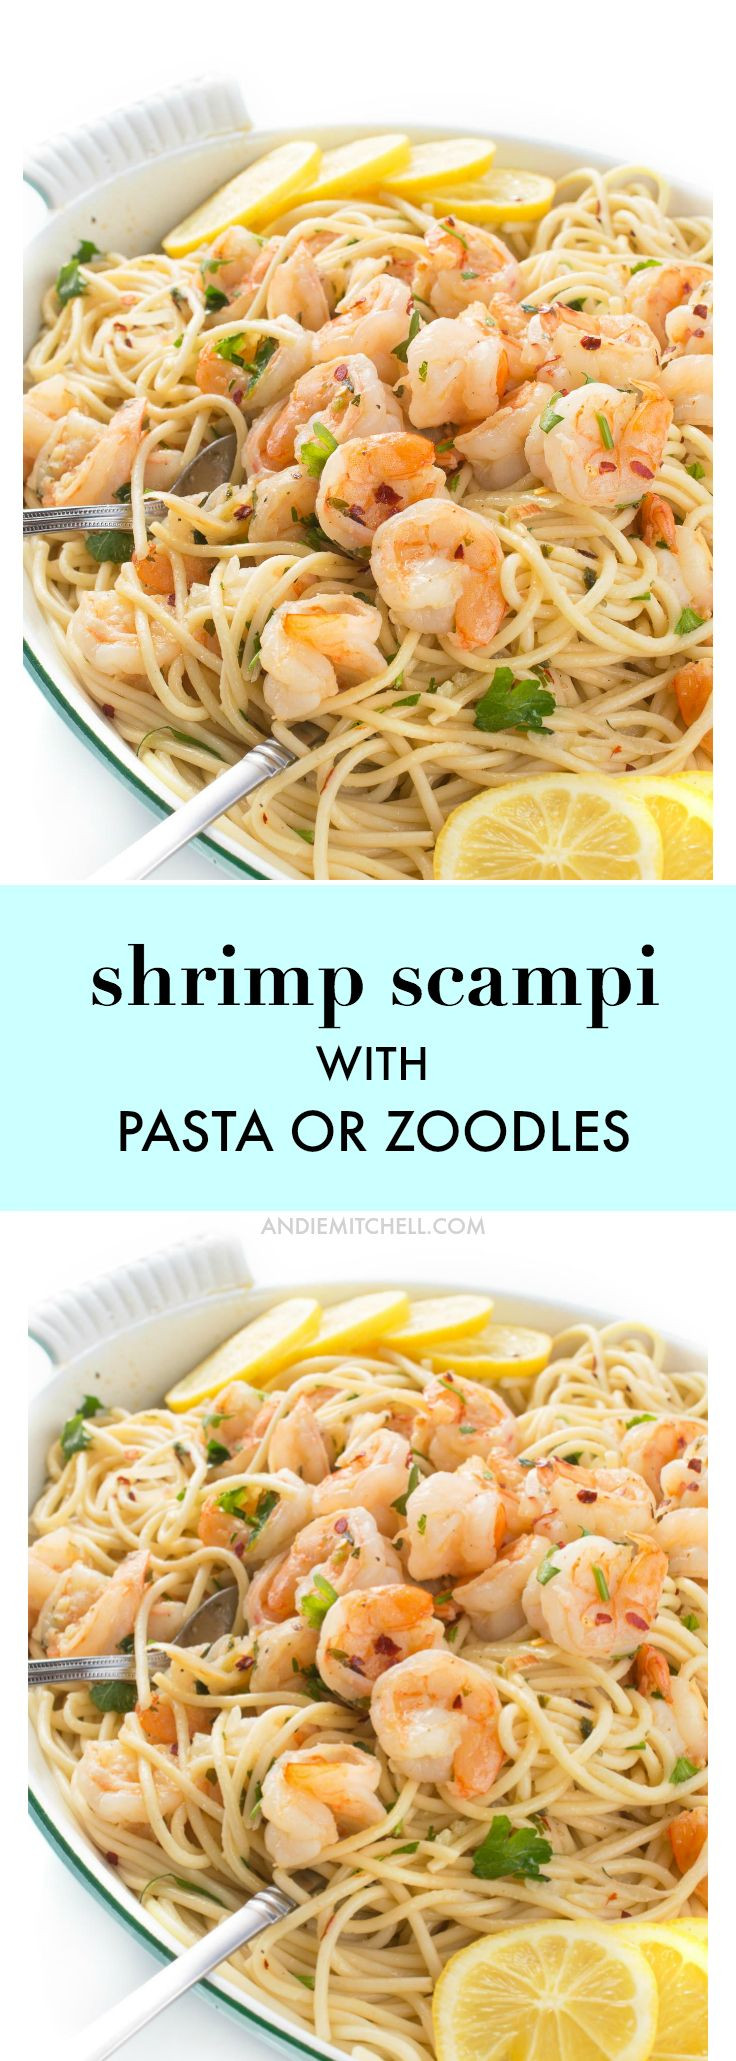 Authentic Italian Seafood Pasta Recipes
 Shrimp Scampi with Pasta or Zoodles Recipe